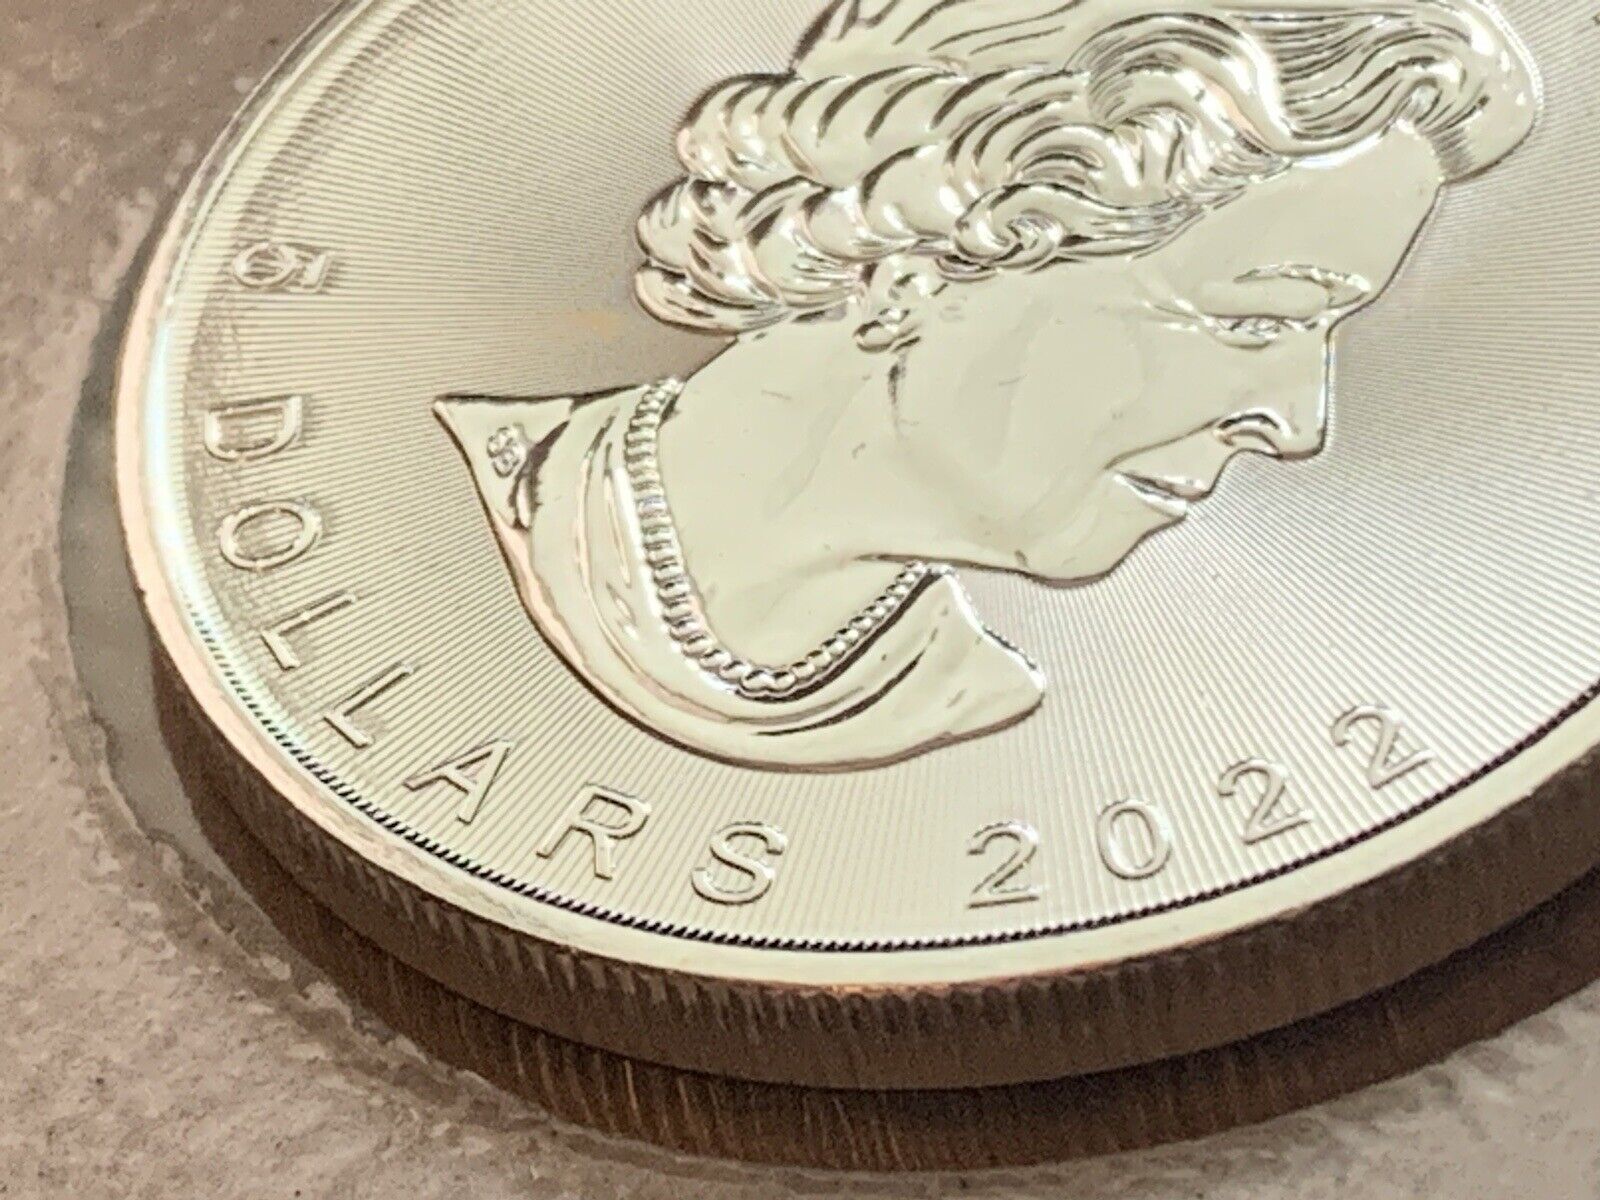 2022 Canadian Silver $5 Maple Leaf .9999 Pure 1 oz SHIPS FREE*